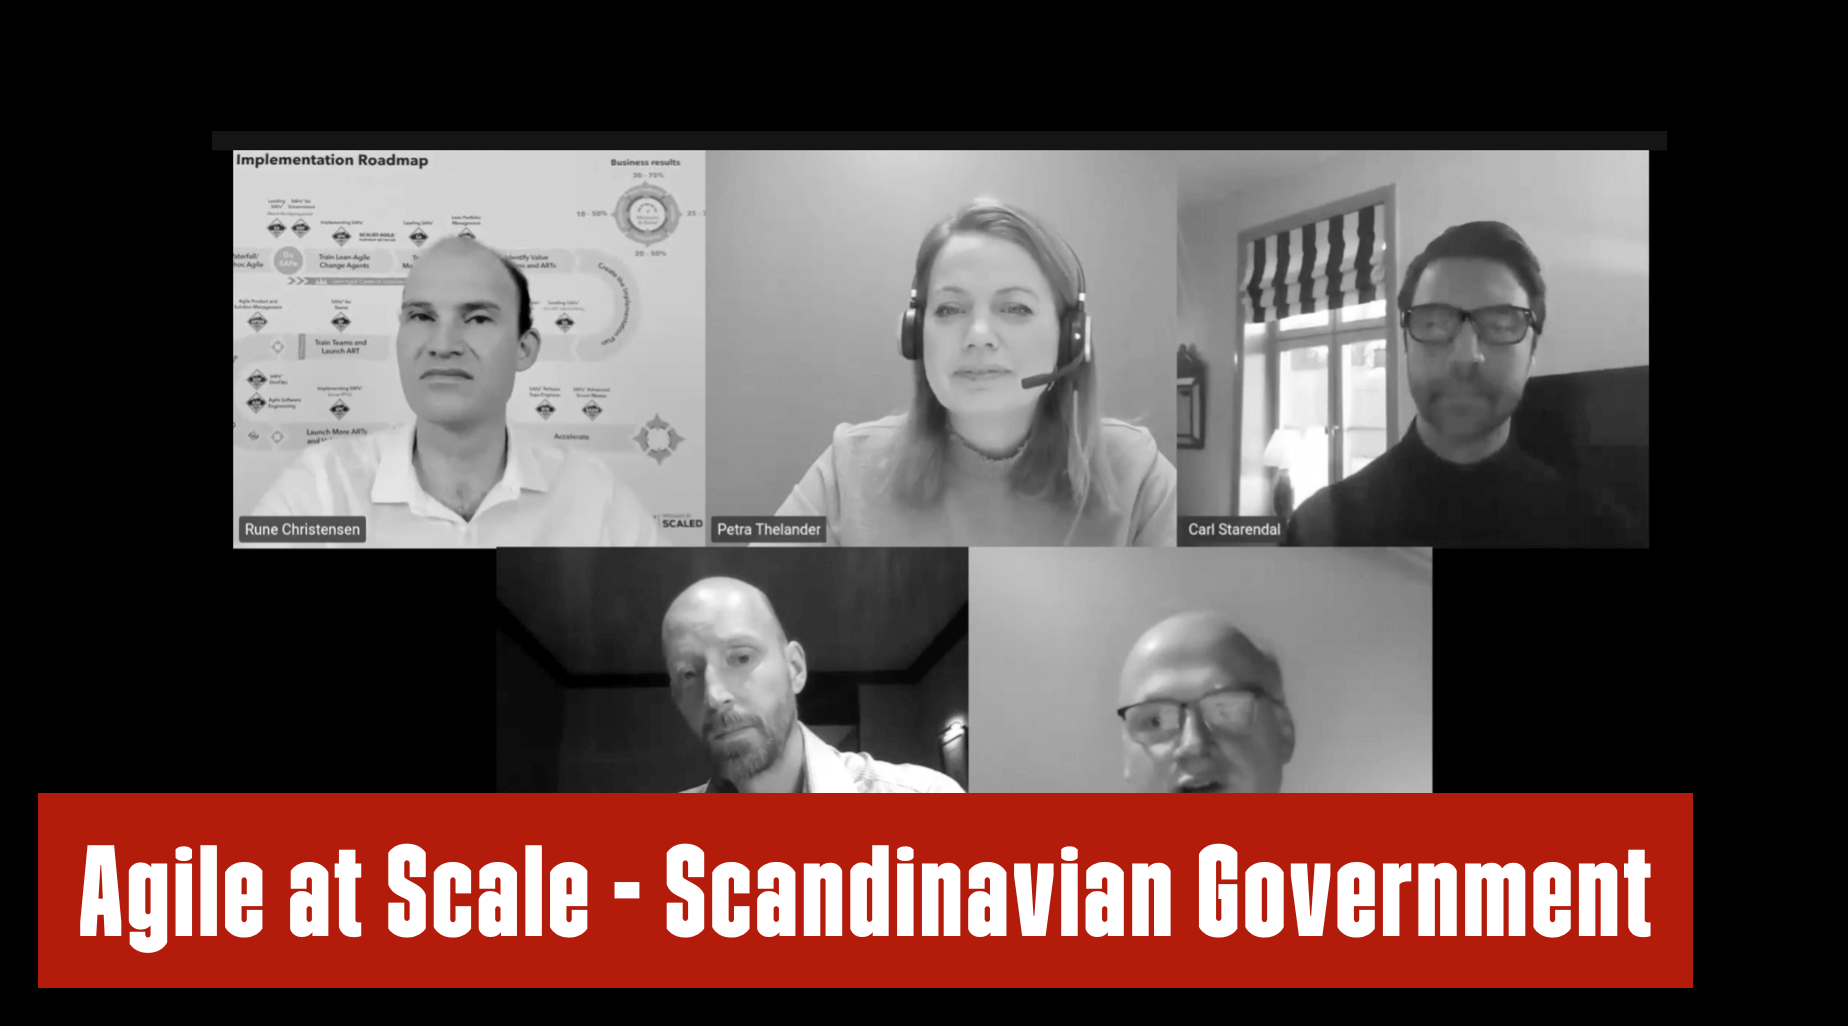 Agile at Scale in the Swedish Government